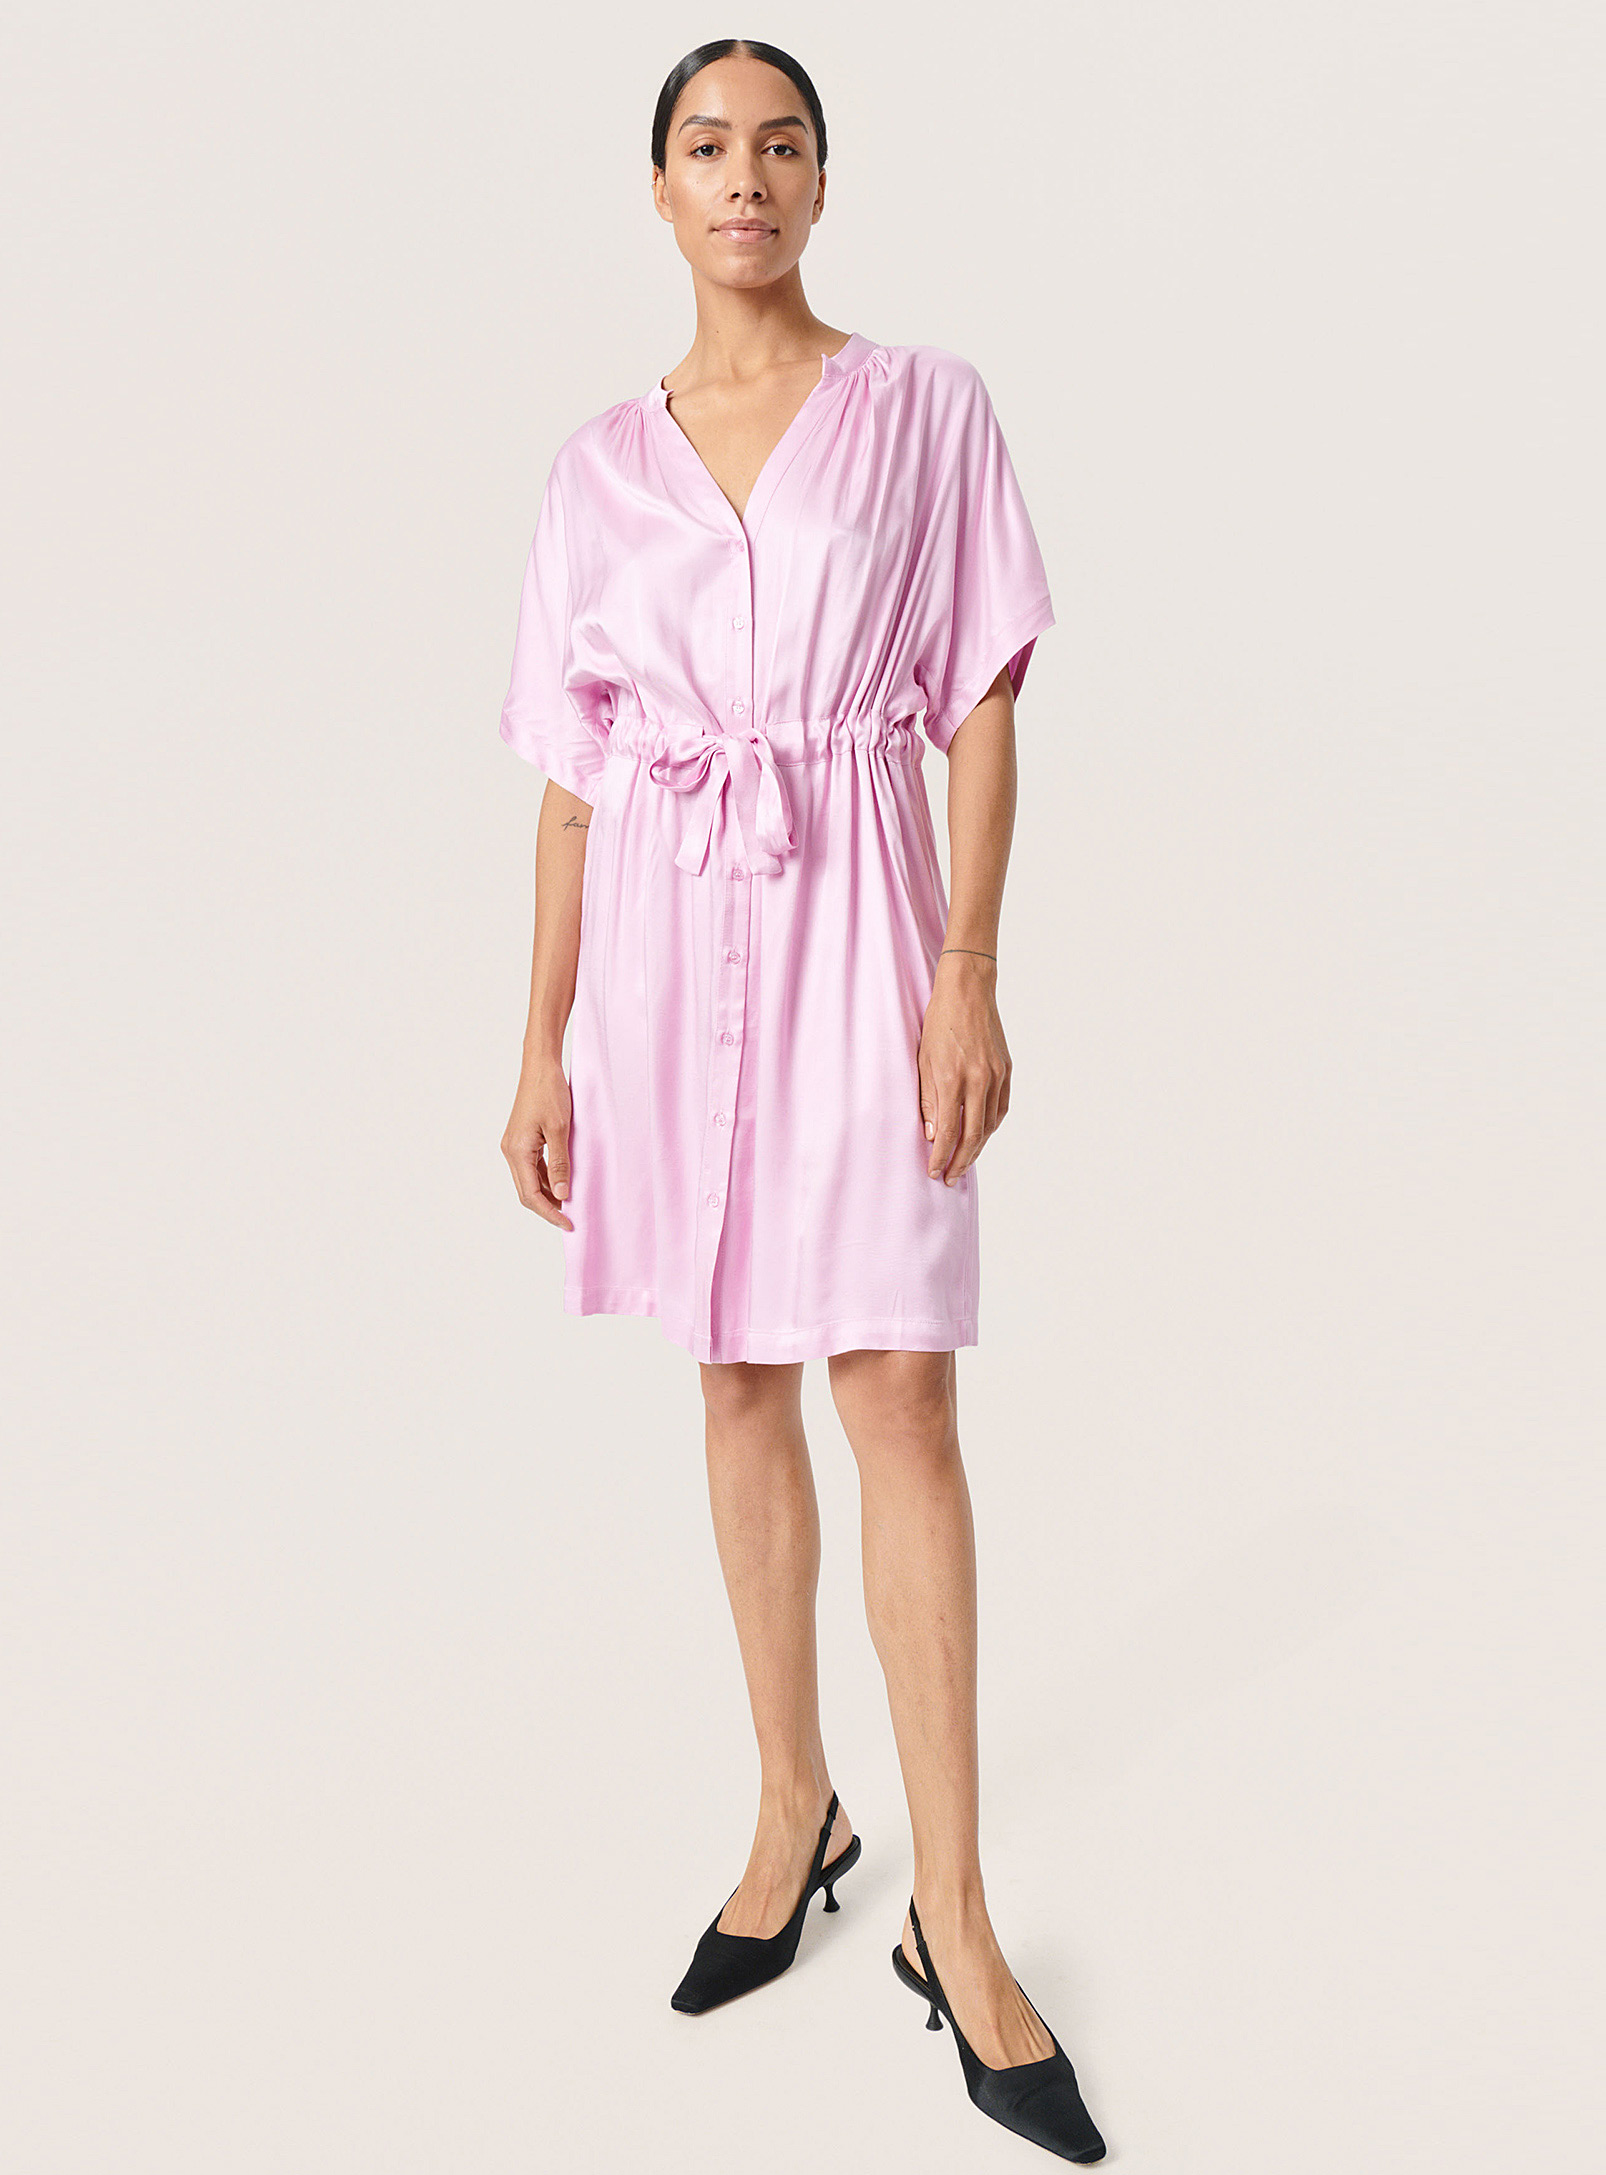 Soaked Luxury - La robe chemise taille coulissante Charma Arowe